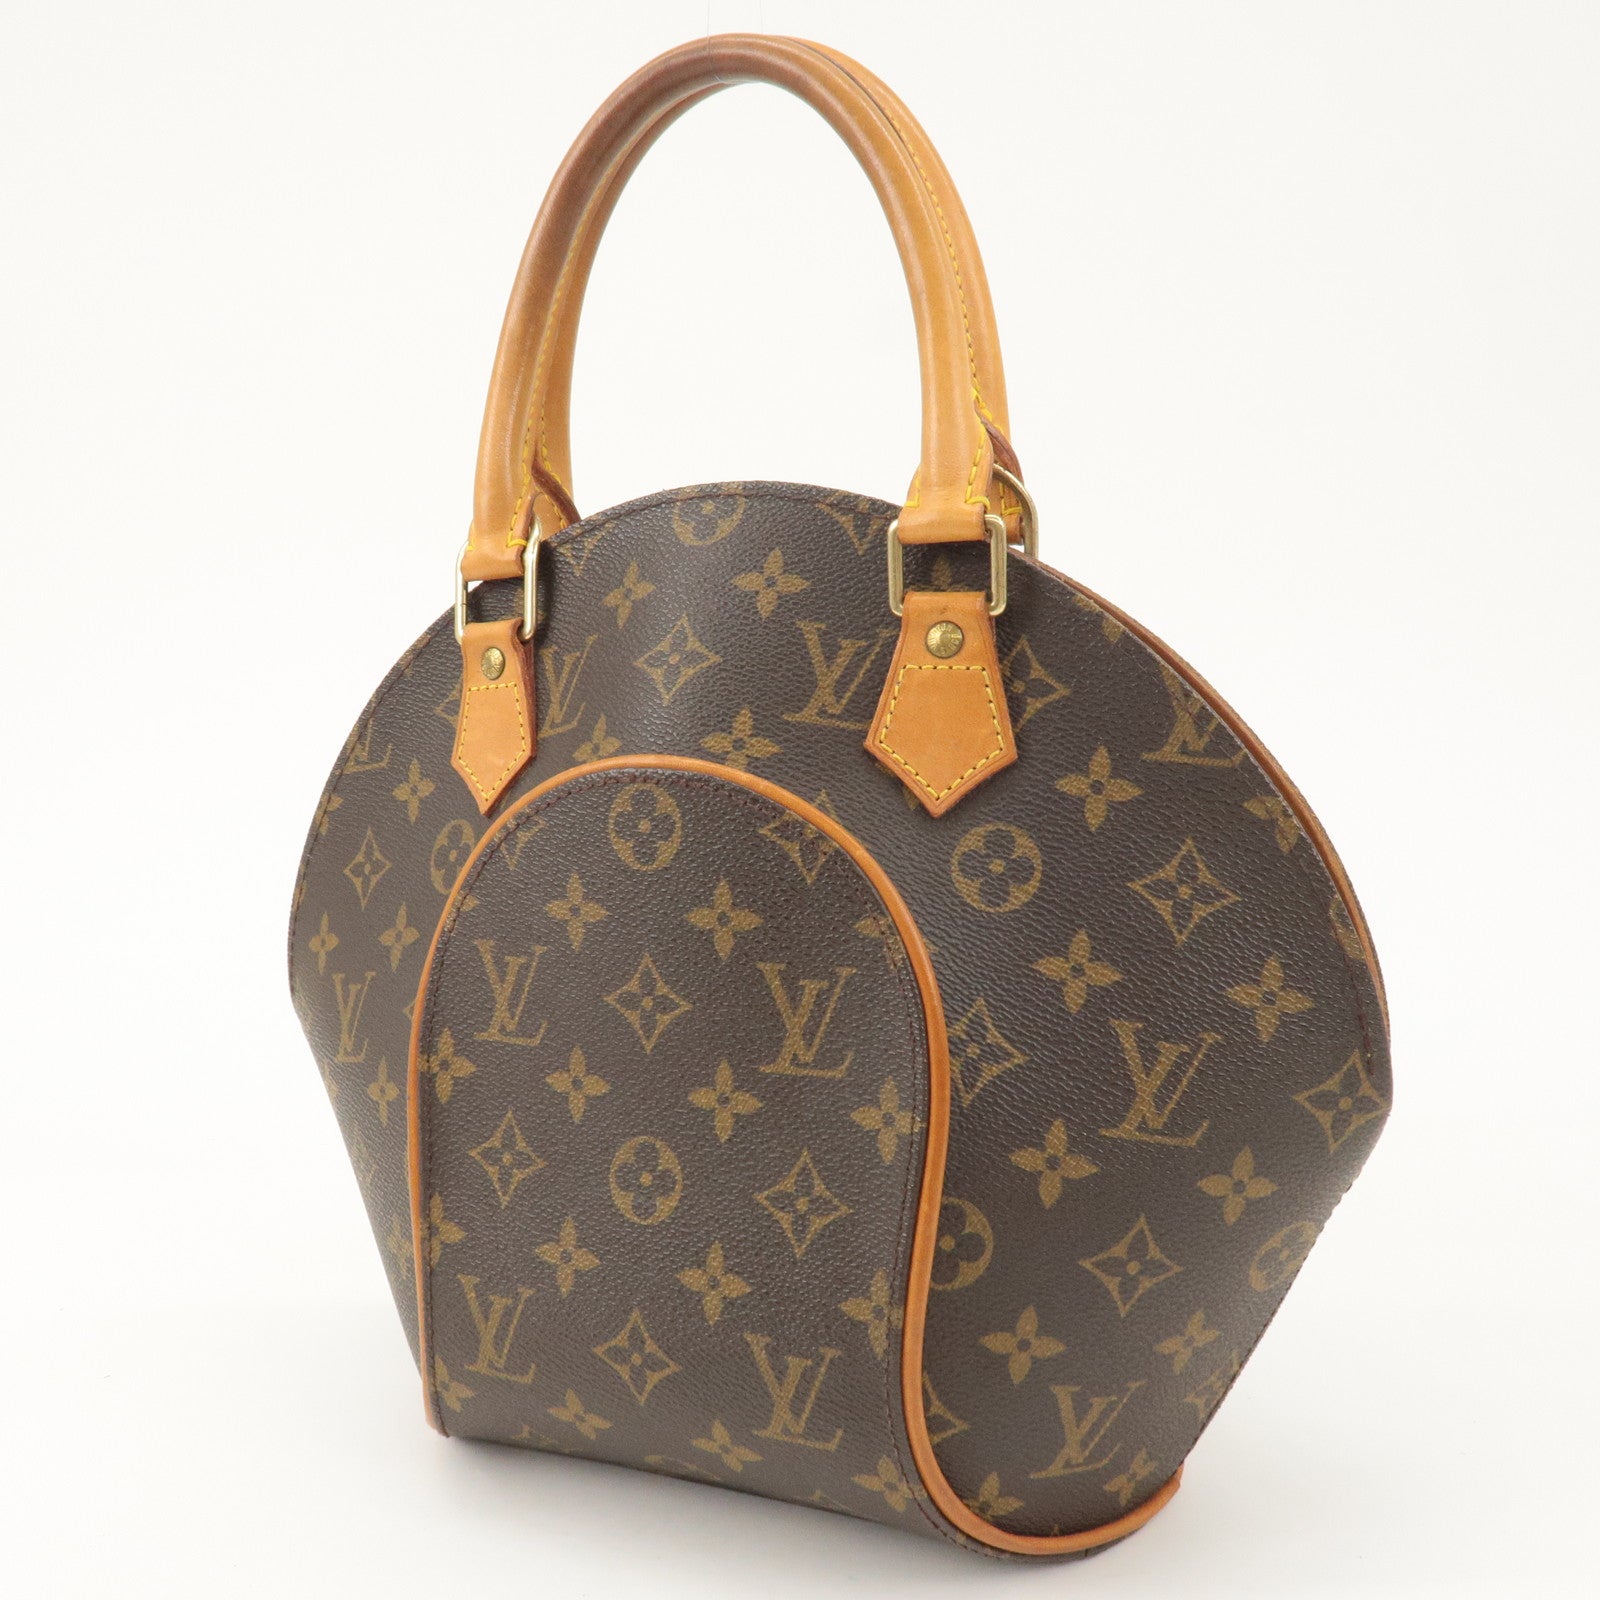 Buy Free Shipping [Used] LOUIS VUITTON Ellipse PM Handbag Monogram M51127  from Japan - Buy authentic Plus exclusive items from Japan